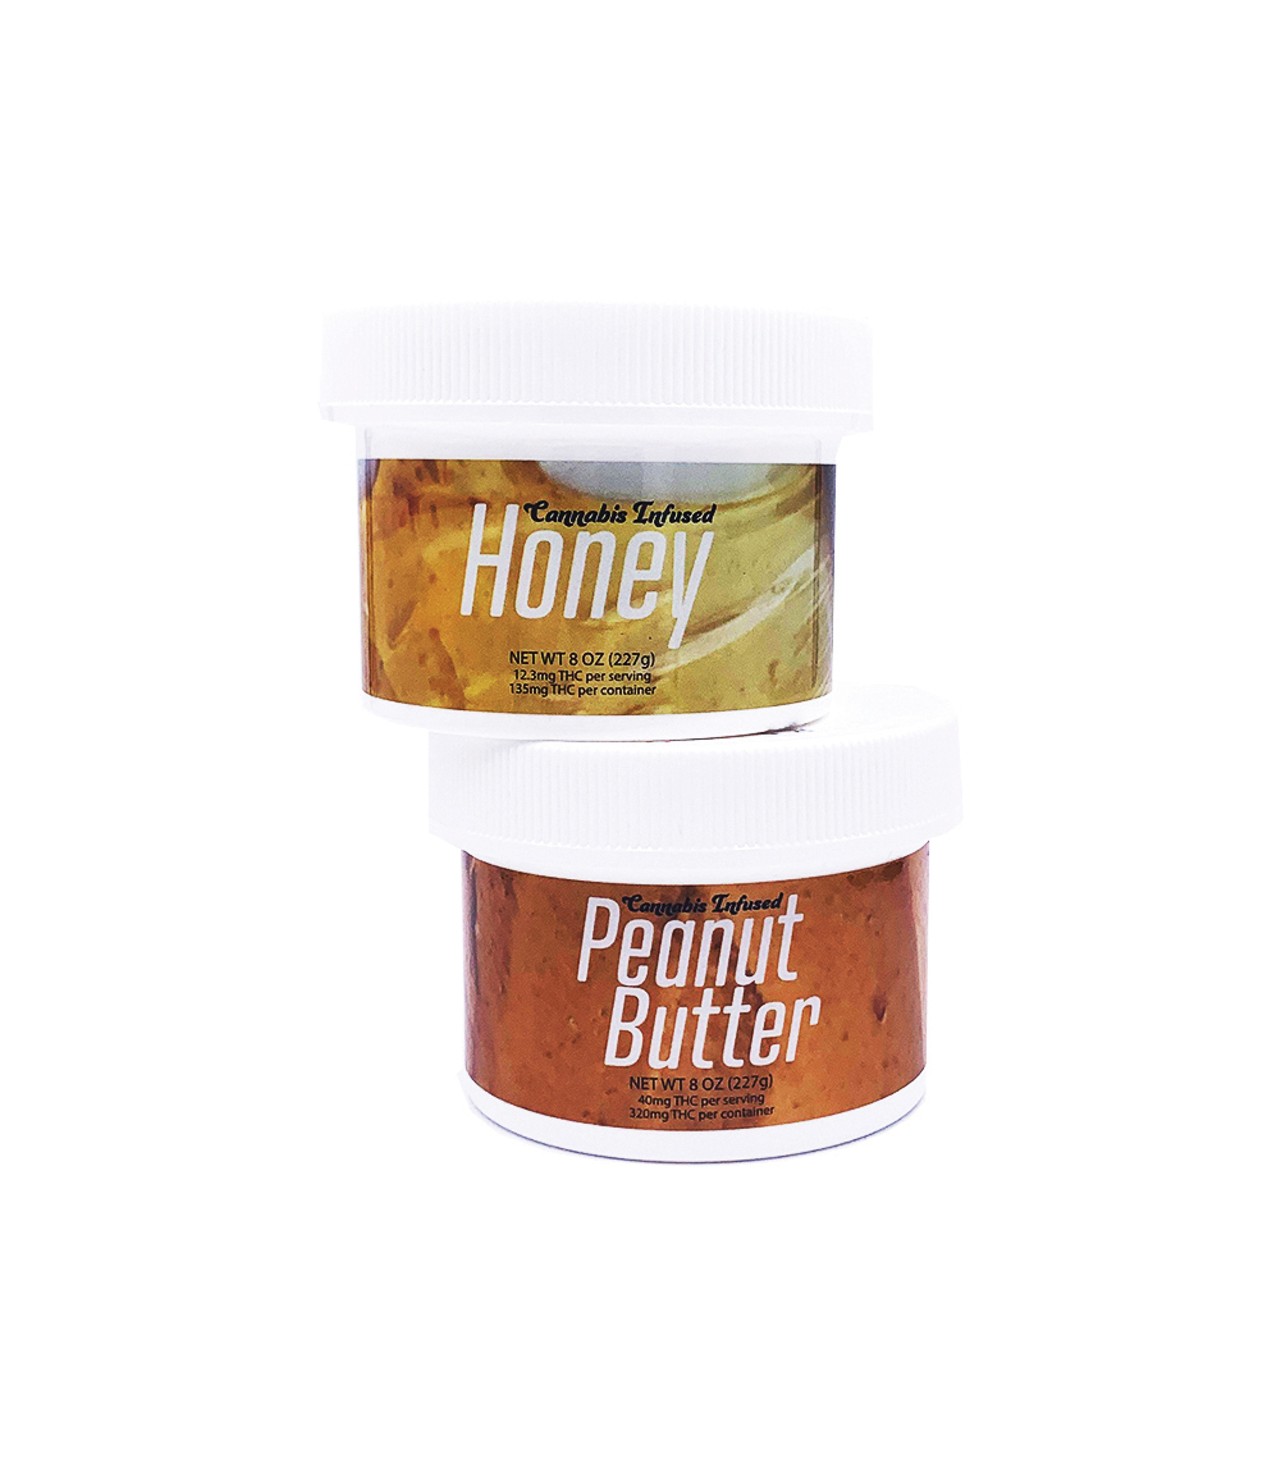 For those who like to spread the love and their high. Wait, what? 
Detroit Fudge Company medicated peanut butter and honey, $28-$30
LIV, 2625 Hilton Rd., Ste. 100, Ferndale; 248-420-4200; livferndale.com | Joyology by Holistic Health Wayne, 38110 Michigan Ave., Wayne; 734-884-4449; hhwayne.com
The Ann Arbor-based medible makers over at the Detroit Fudge Company have really outdone themselves with this one, folks. In addition to edible mainstays like brownies, candy bars, and, well, fudge, the Detroit Fudge Company has crafted both medicated peanut butter and honey. The peanut butter, made with crushed, dry-roasted peanuts, is infused with 200 mg of spreadable THC. Slap it on toast, make a batch of cookies, or eat it by the spoonful over the sink like a true stoner. For you tea-drinking weed lovers out there, DFC also has a medicated honey option, which contains 135 mg of THC extract that promises an uplifting, daylong euphoric high. Uh, yes, please.